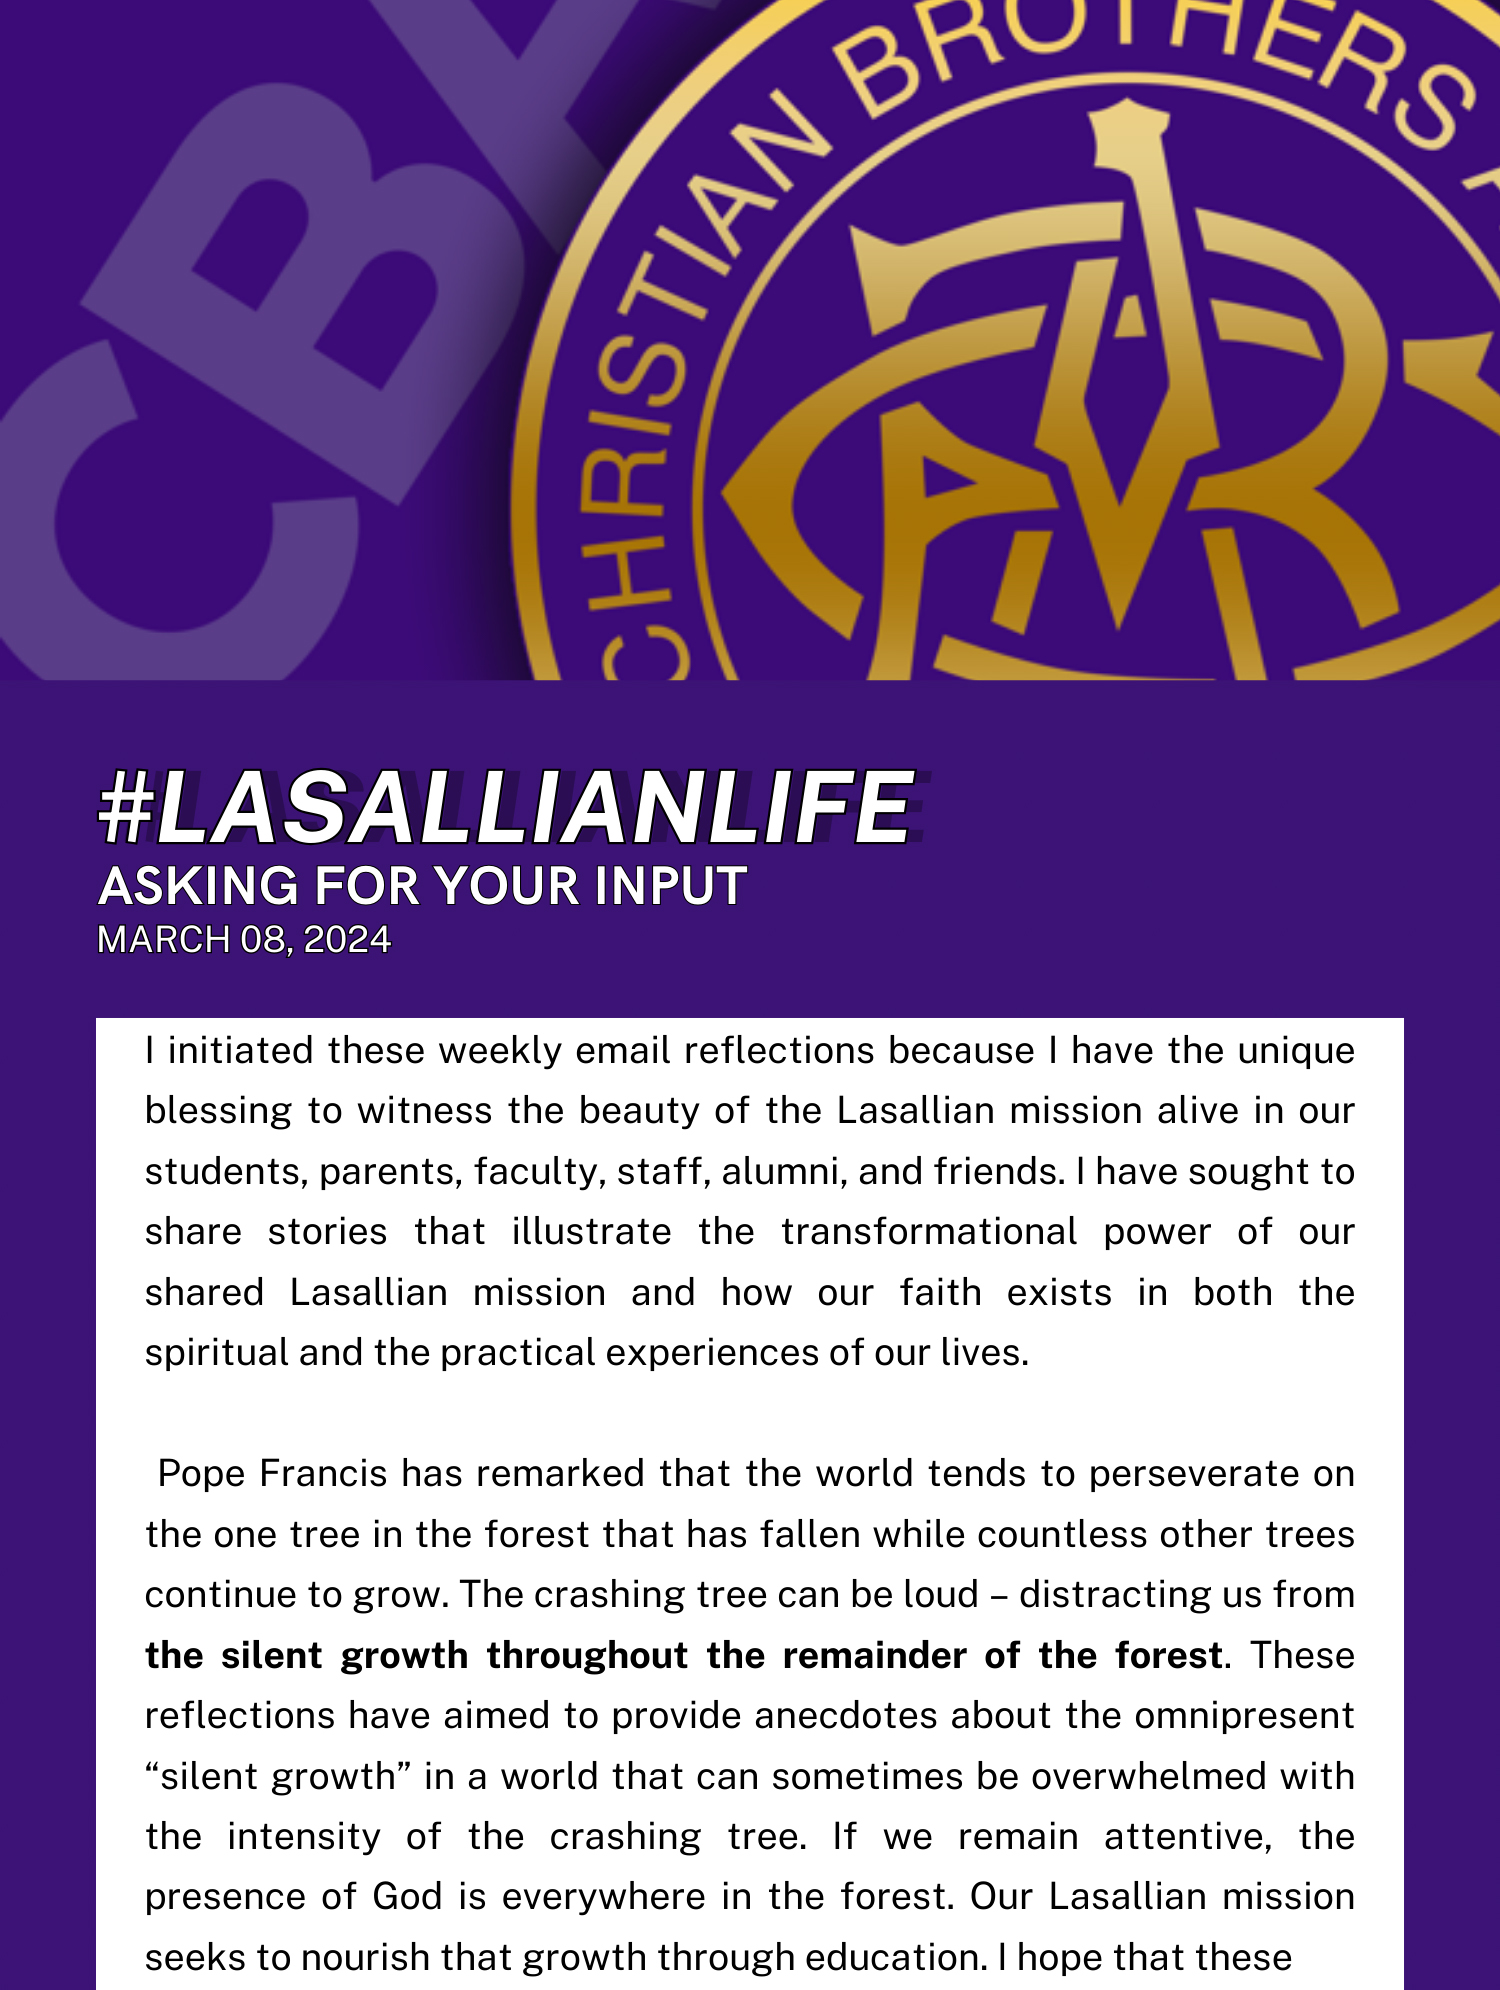 #LasallianLife : Asking For Your Input